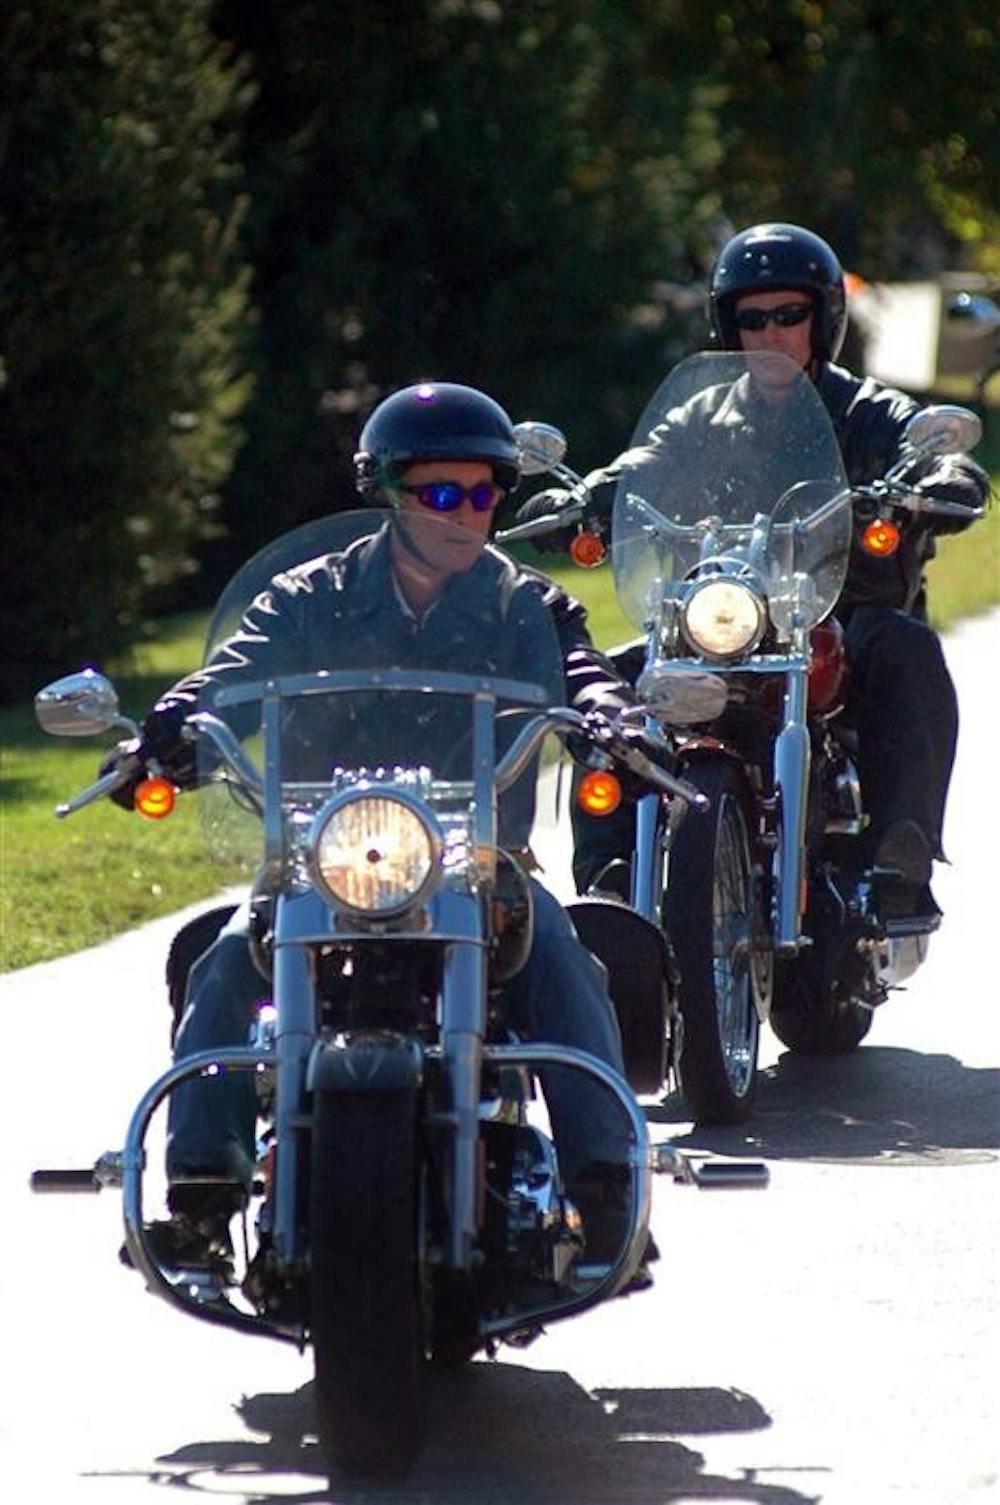 Gov. Mitch Daniels, left, leads a group of about 300 motorcycles into a Harley-Davidson dealership on Friday in Bloomington. Daniels rode with members of the American Bikers Aimed Towards Education on the ride, benefiting the National Guard Relief Fund.